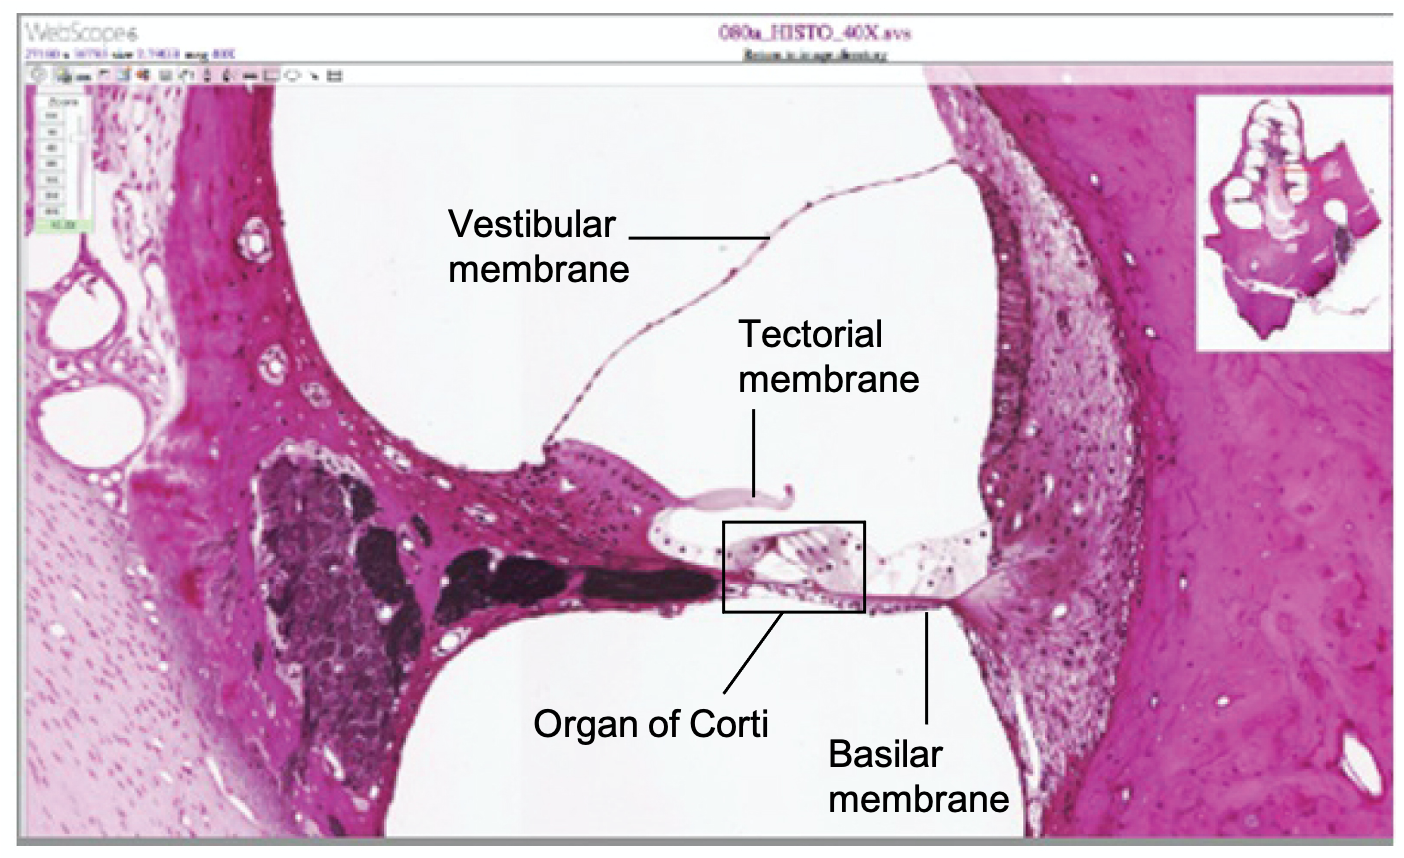 Micrograph of a cochlear cross section with vestibular, tectorial and basilar membranes, and organ of Corti.